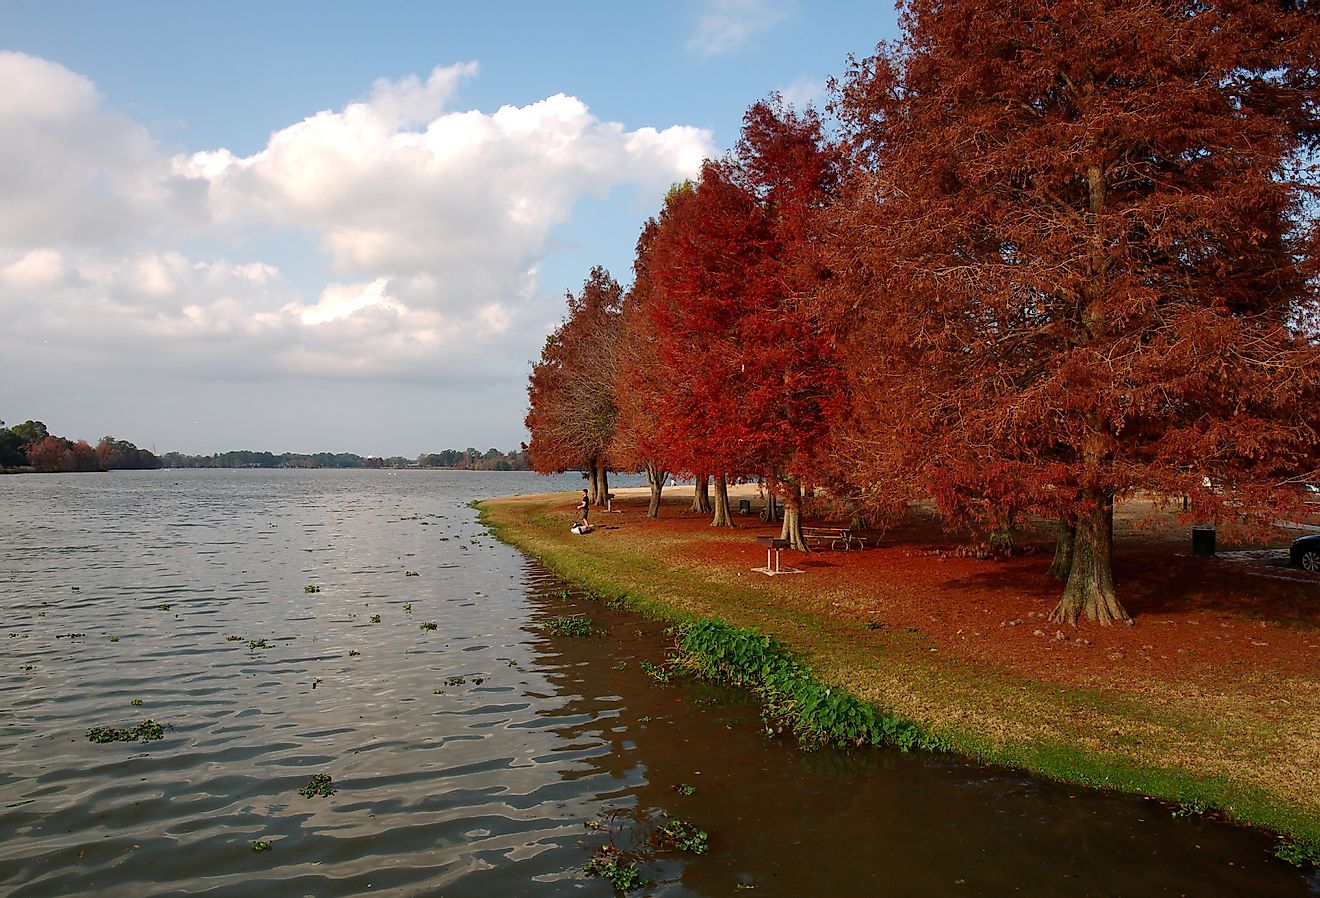 Cypress trees with red leaves at University Lake, Baton Rouge, Louisiana.